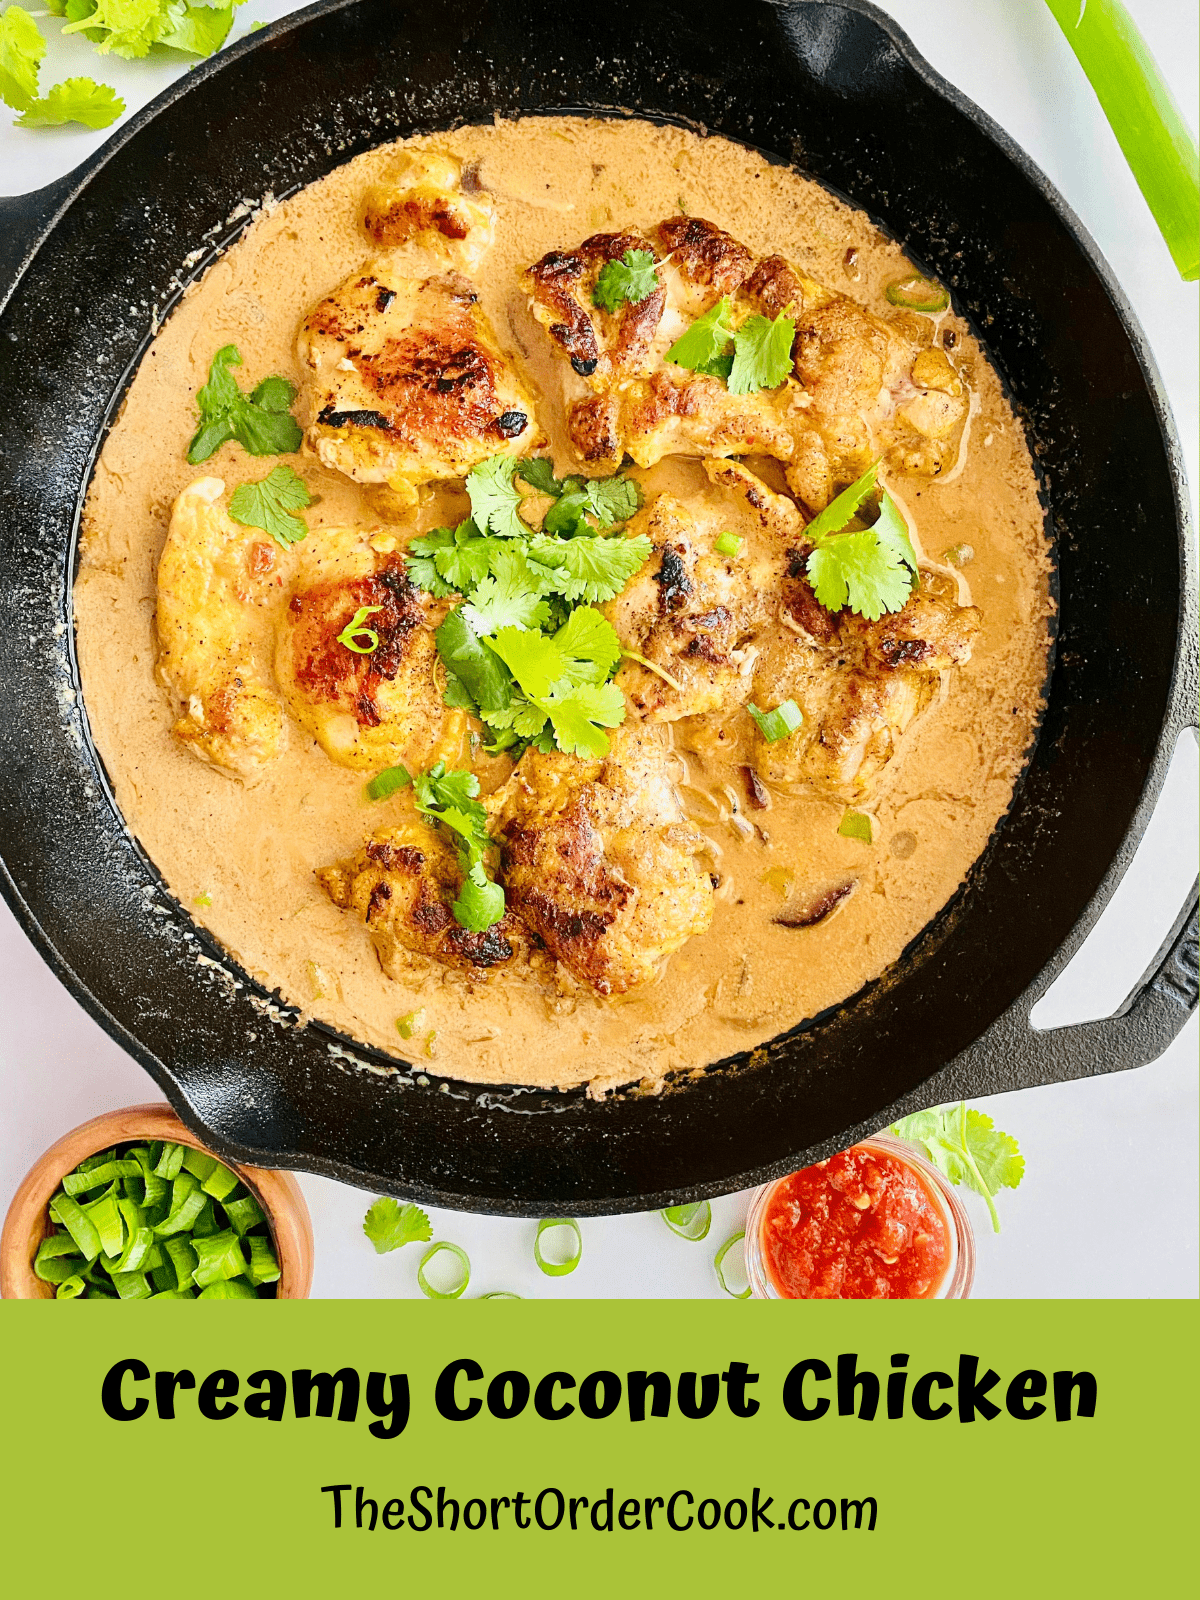 Cast Iron skillet with Creamy Coconut Chicken topped with cilantro and ready to serve.